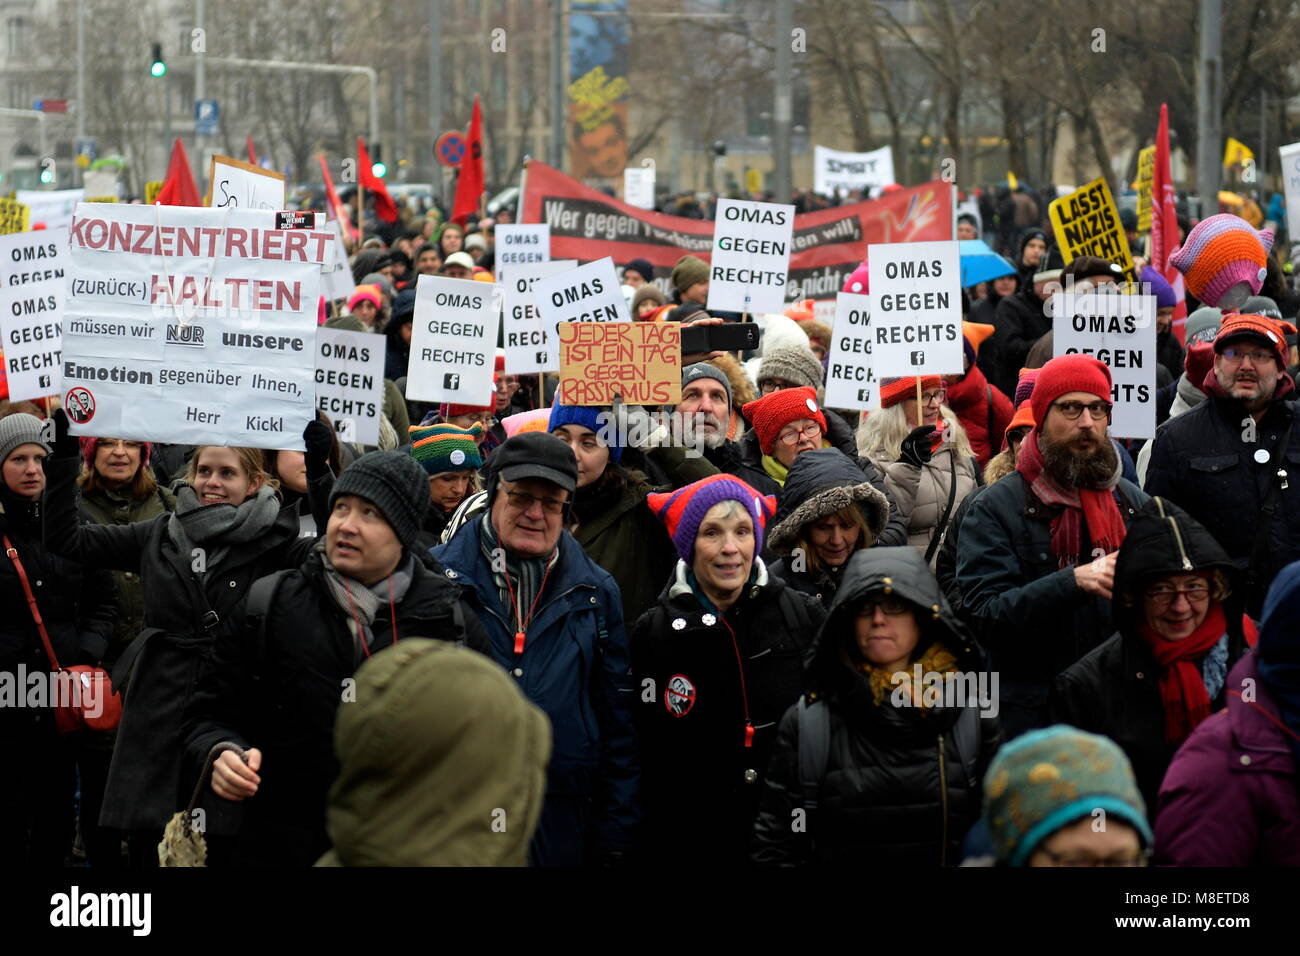 Vienna, Austria. March 17, 2018. Mass demonstration against racism and fascism in Vienna. The demonstration, like the previous mass demonstration on January 13, 2018. Credit: Franz Perc/Alamy Live News Stock Photo